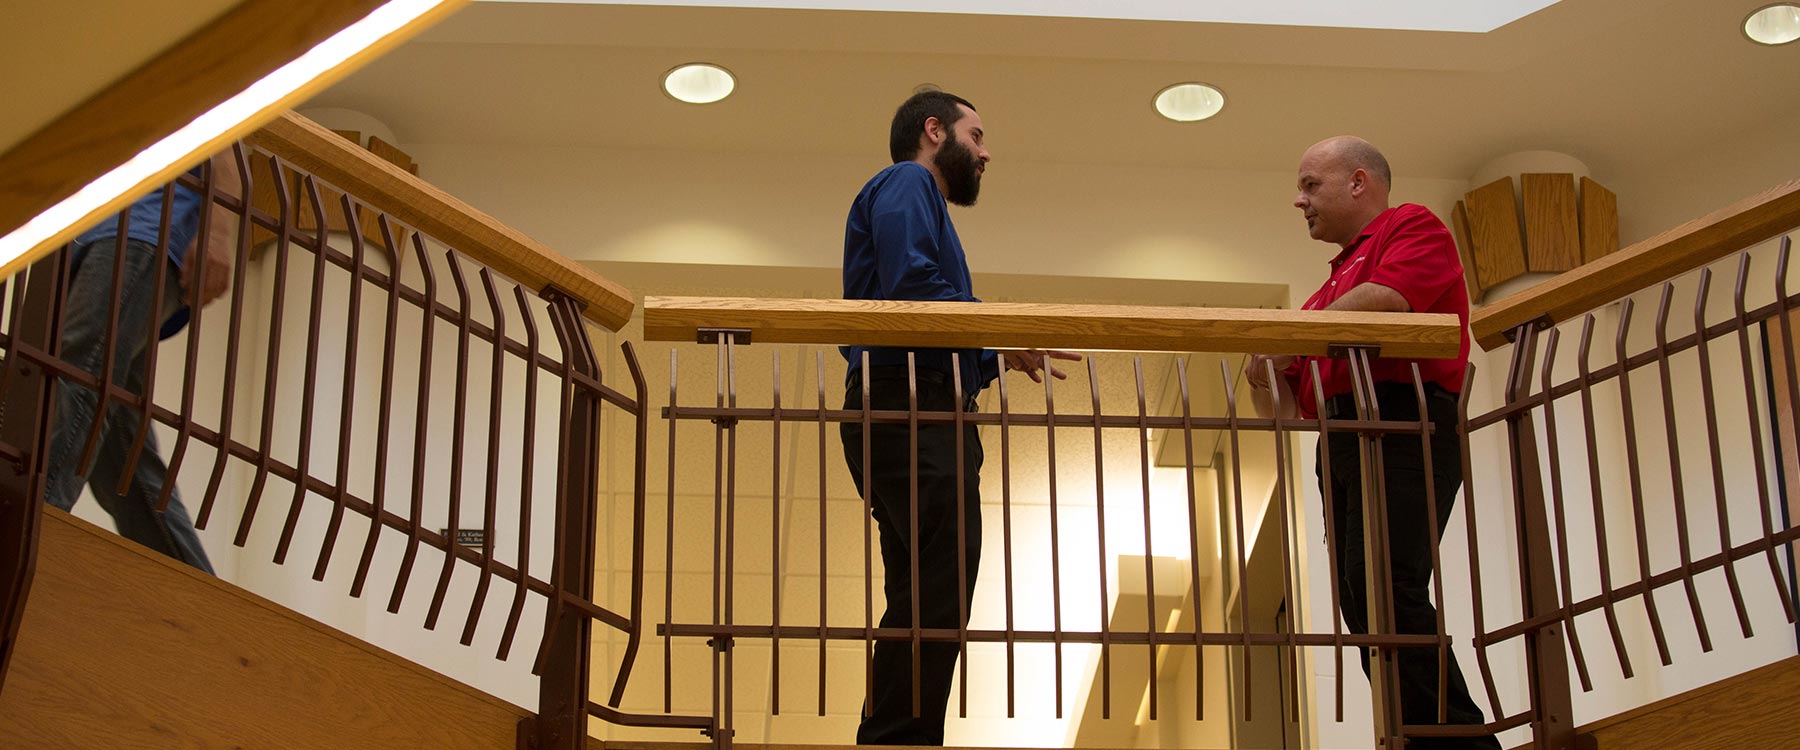 A continuing studies student stands talking with his professor near a balcony railing.